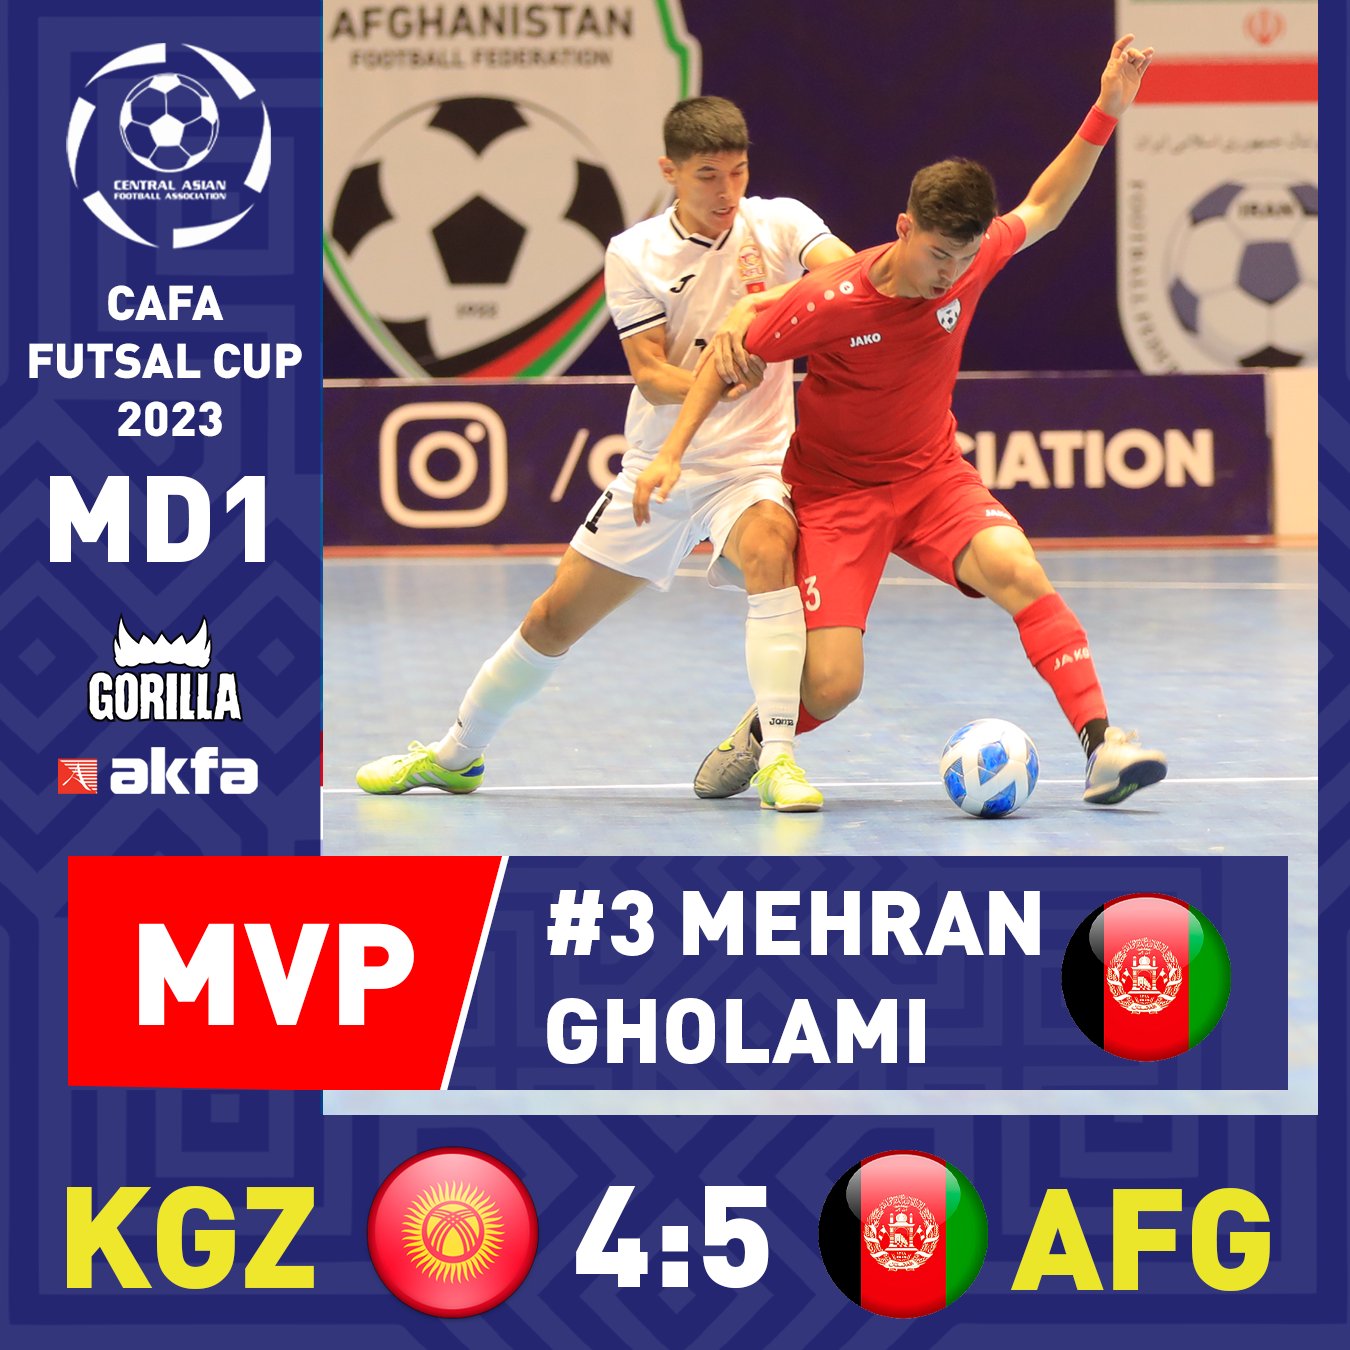  Afghanistan Starts Strong in the 2023 CAFA Futsal Cup with a Thrilling Victory